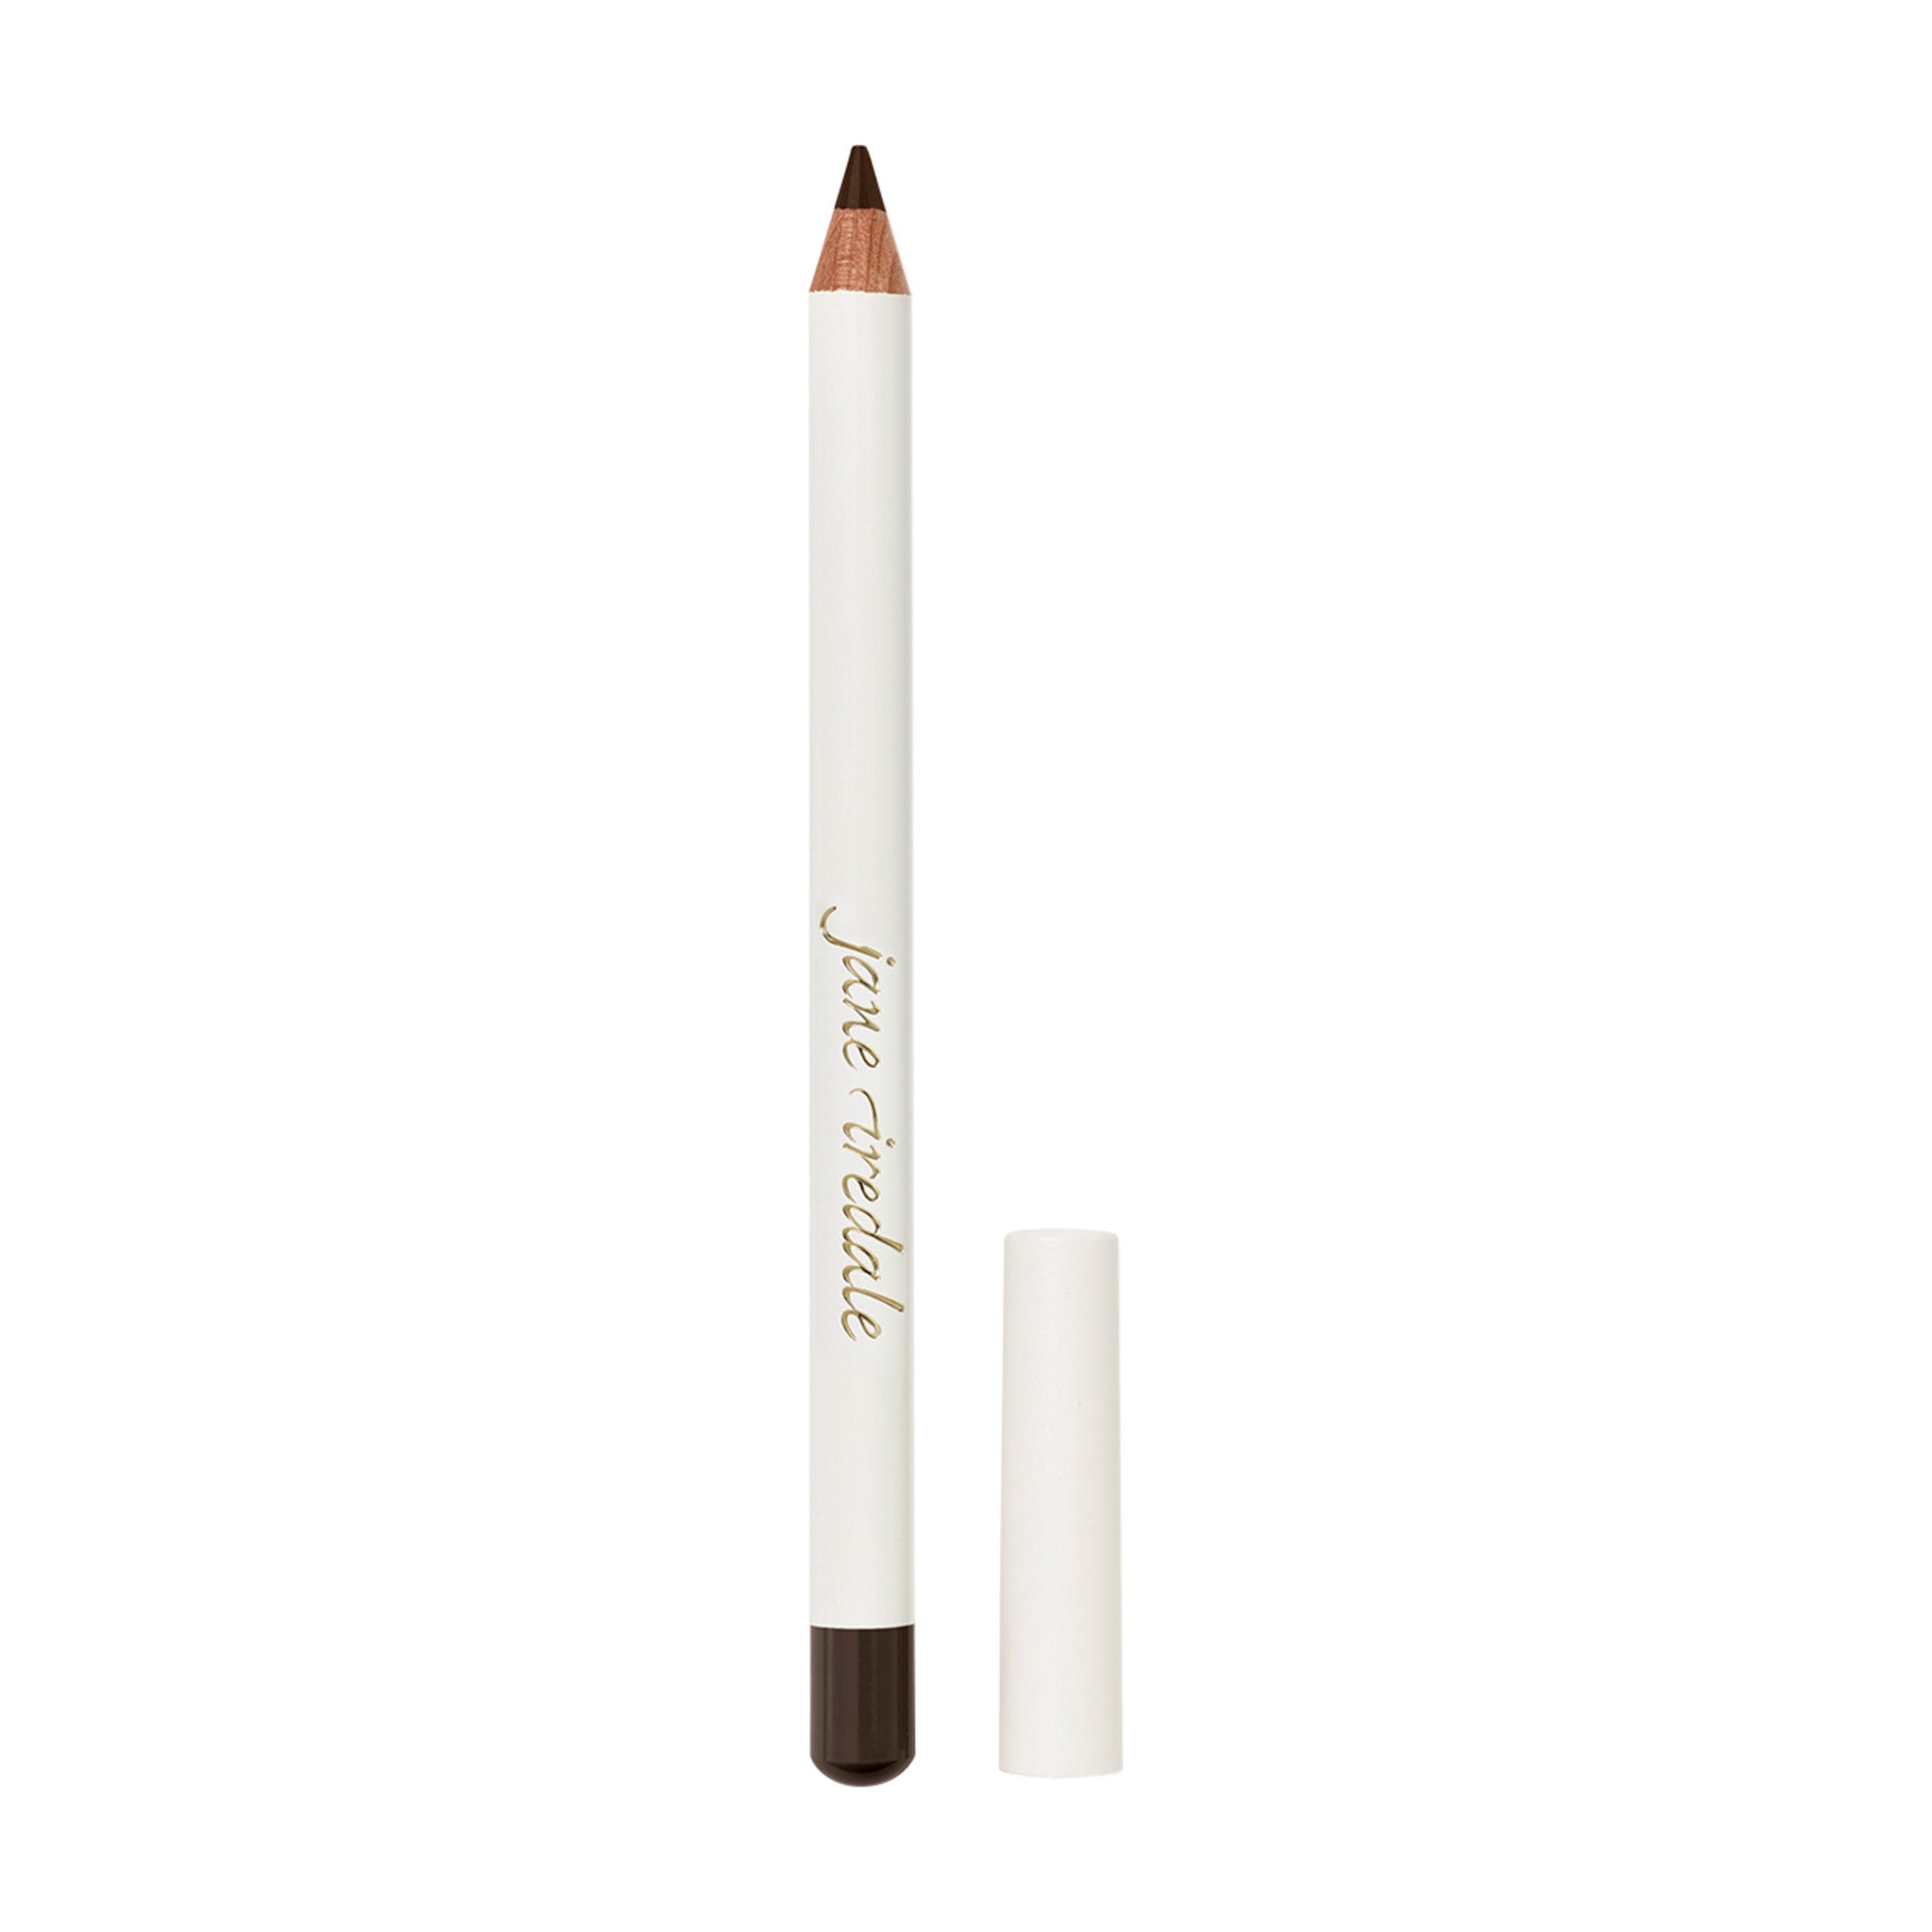 Jane Iredale Pencil Eyeliner Color/Shade variant: Black/Brown main image. This product is in the color black